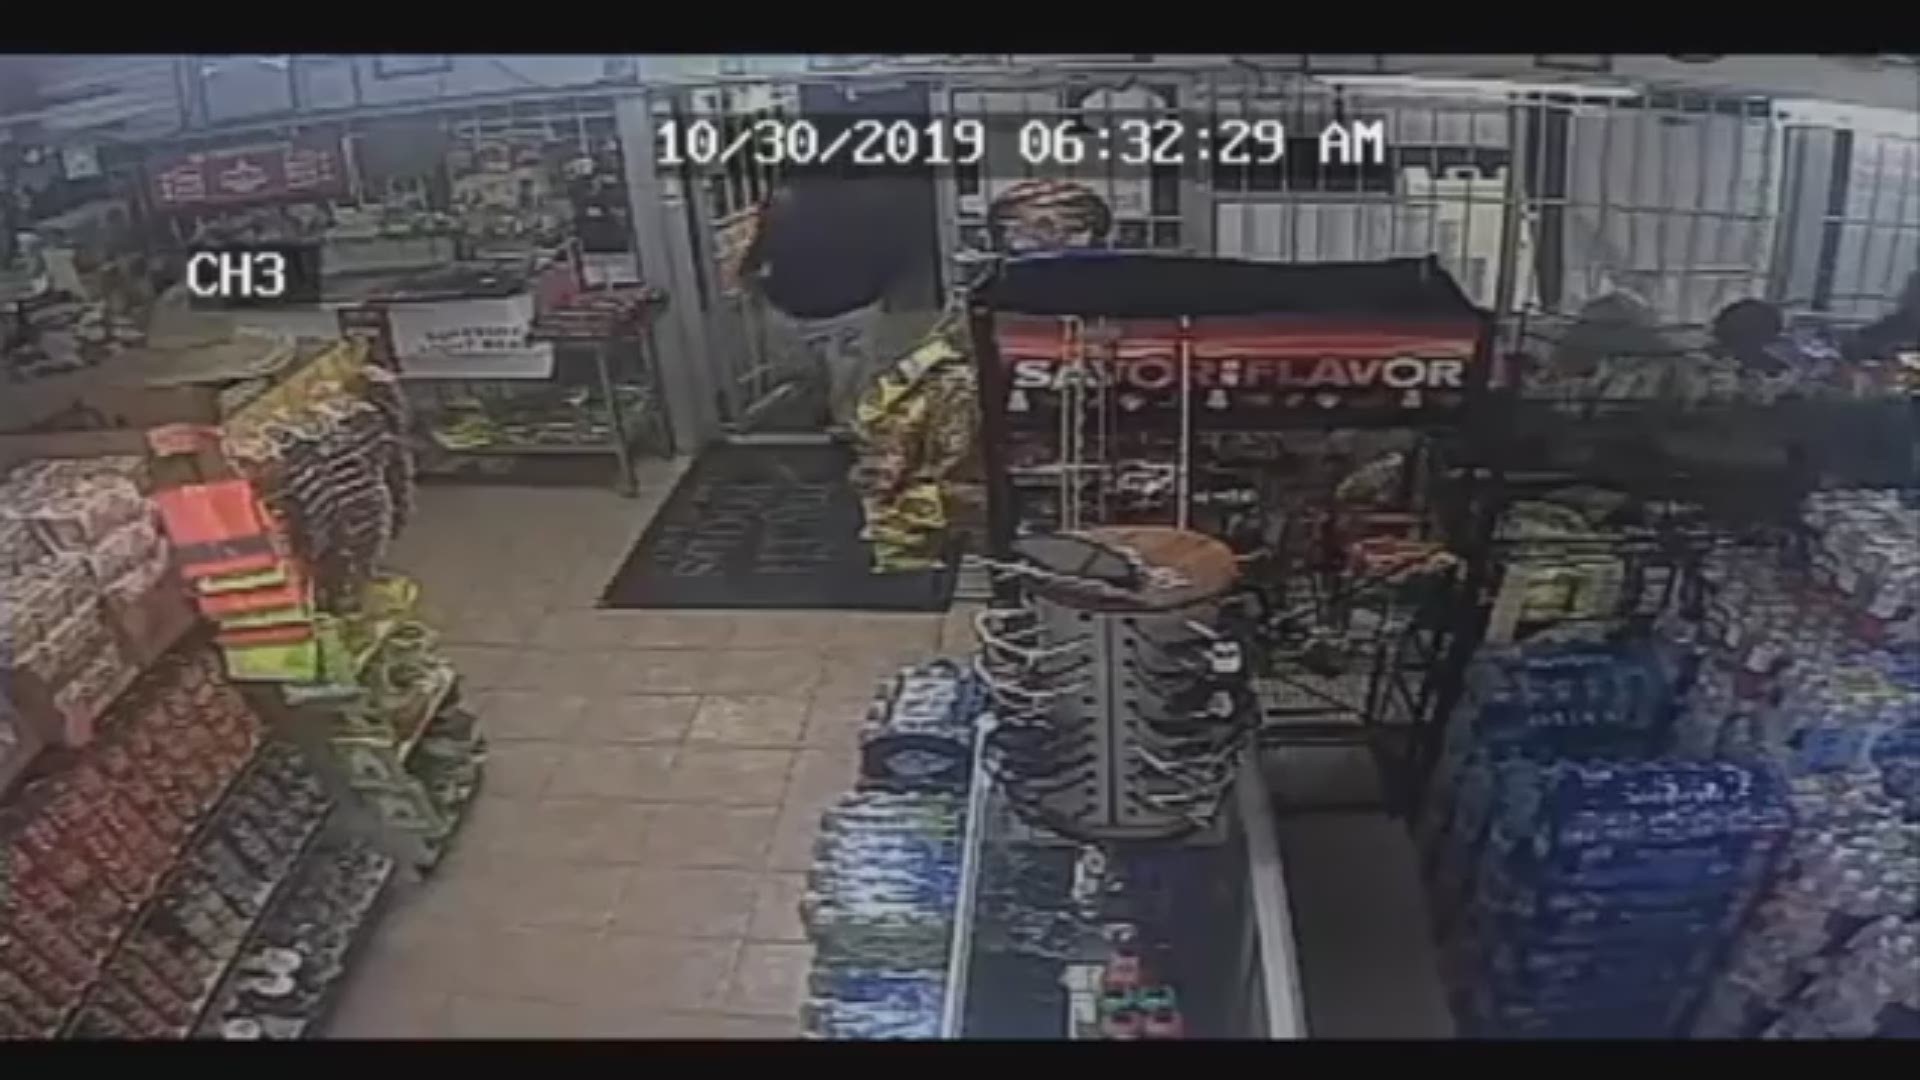 Video provided by HPD and Crime Stoppers show armed men robbing a Spring Branch meat market.